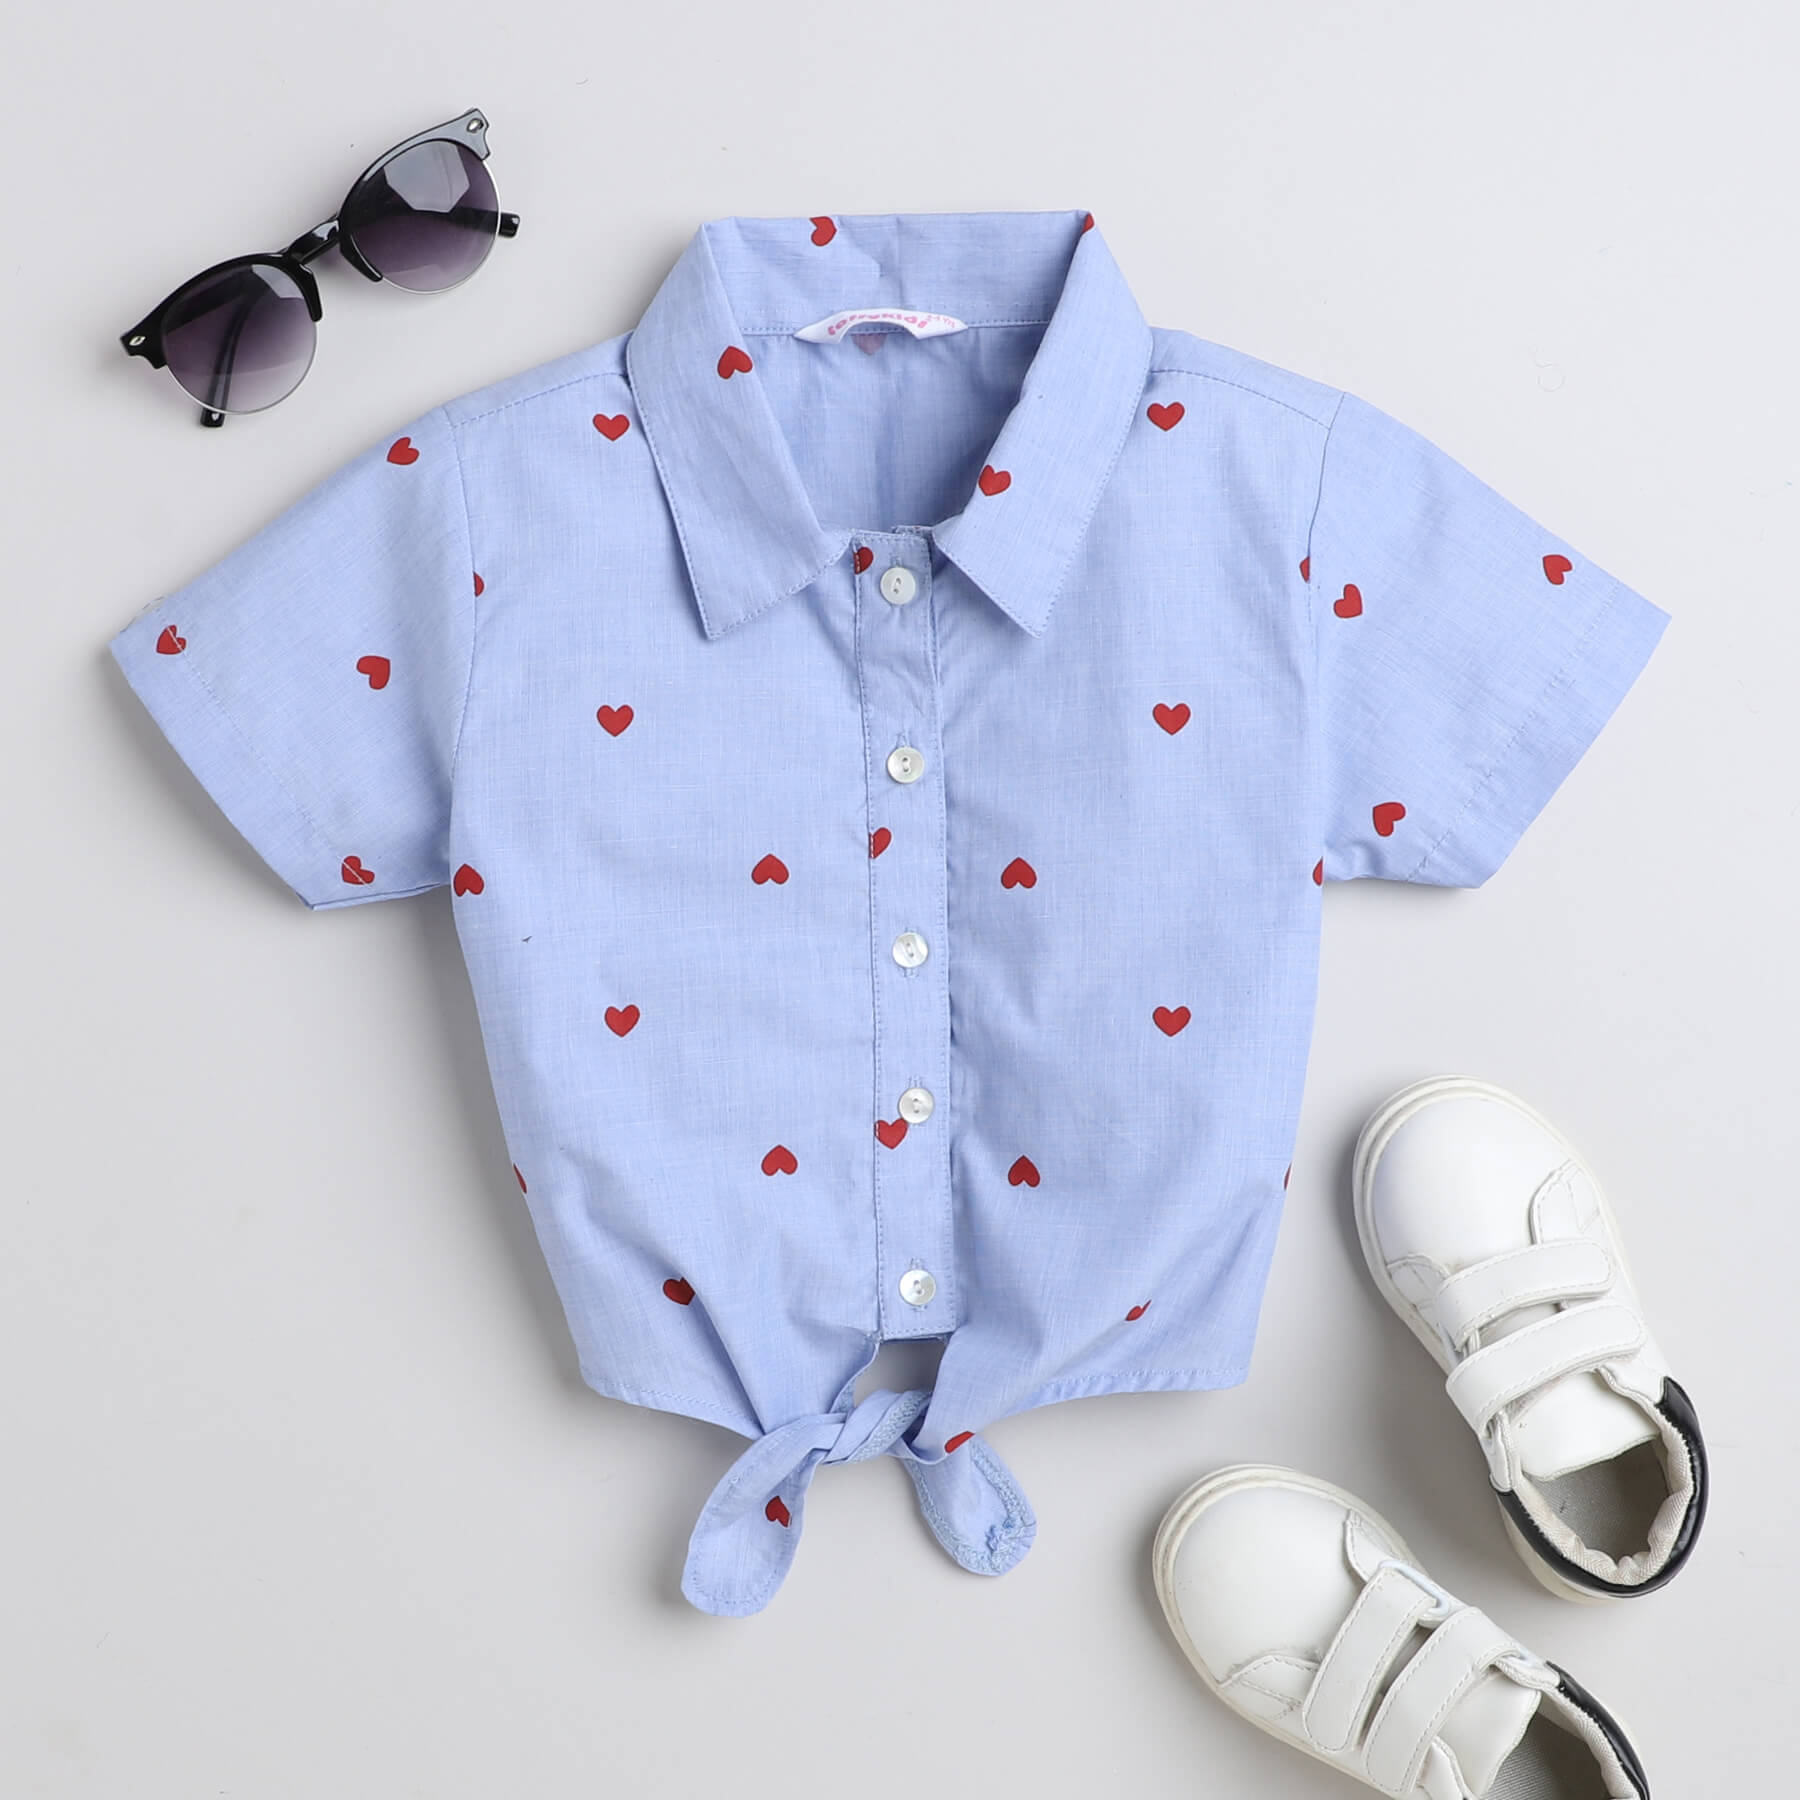 Taffykids 100% cotton Heart printed half sleeves front tie-up button up crop shirt-Blue/Red